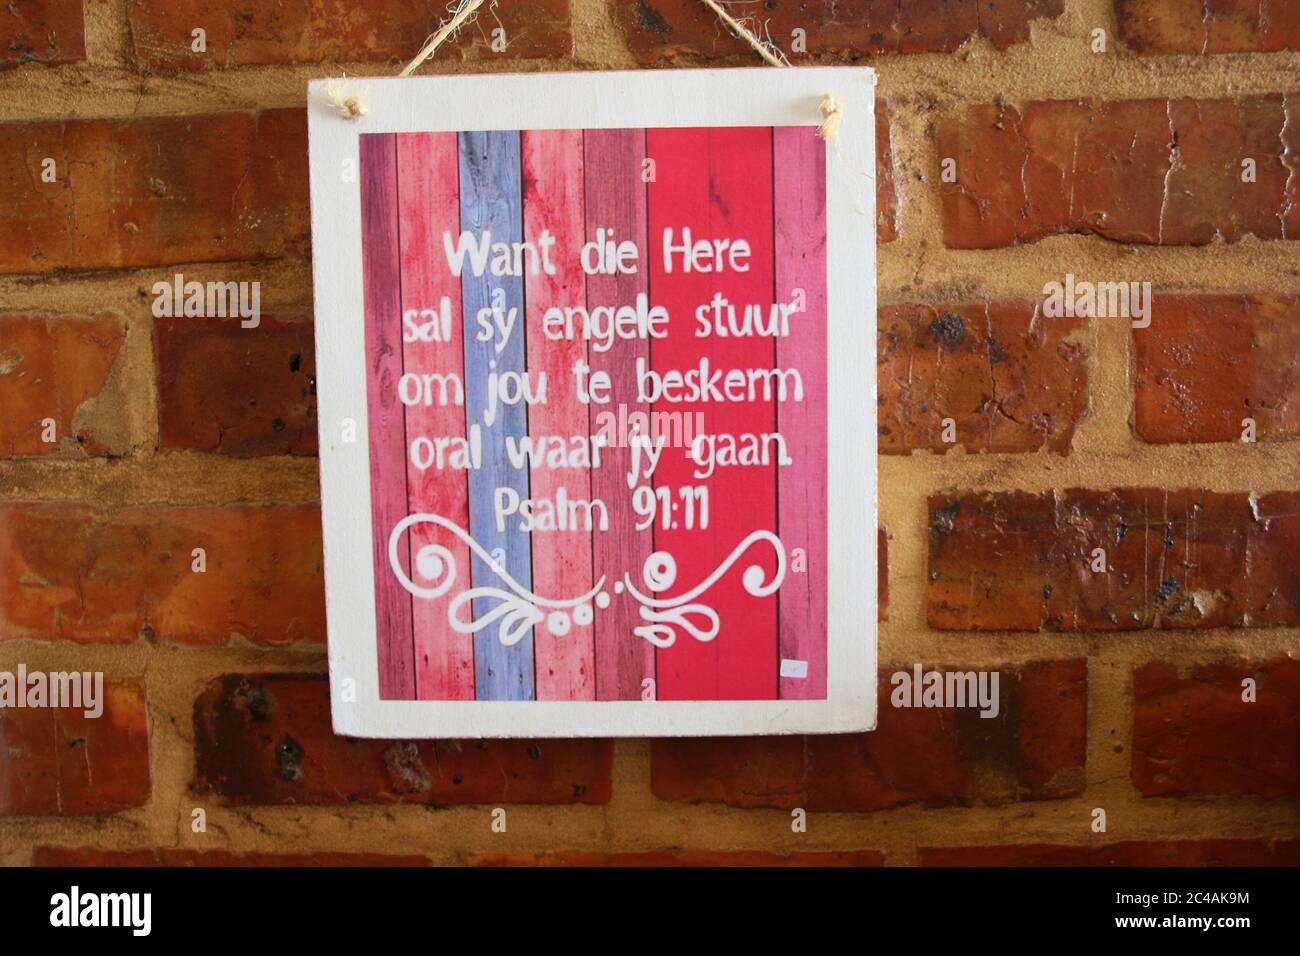 The Crags, South Africa: Wall decoration with the bible psalm 91:11 in Afrikaans language. In a small dinner in the countryside. Garden Route. Africa. Stock Photo